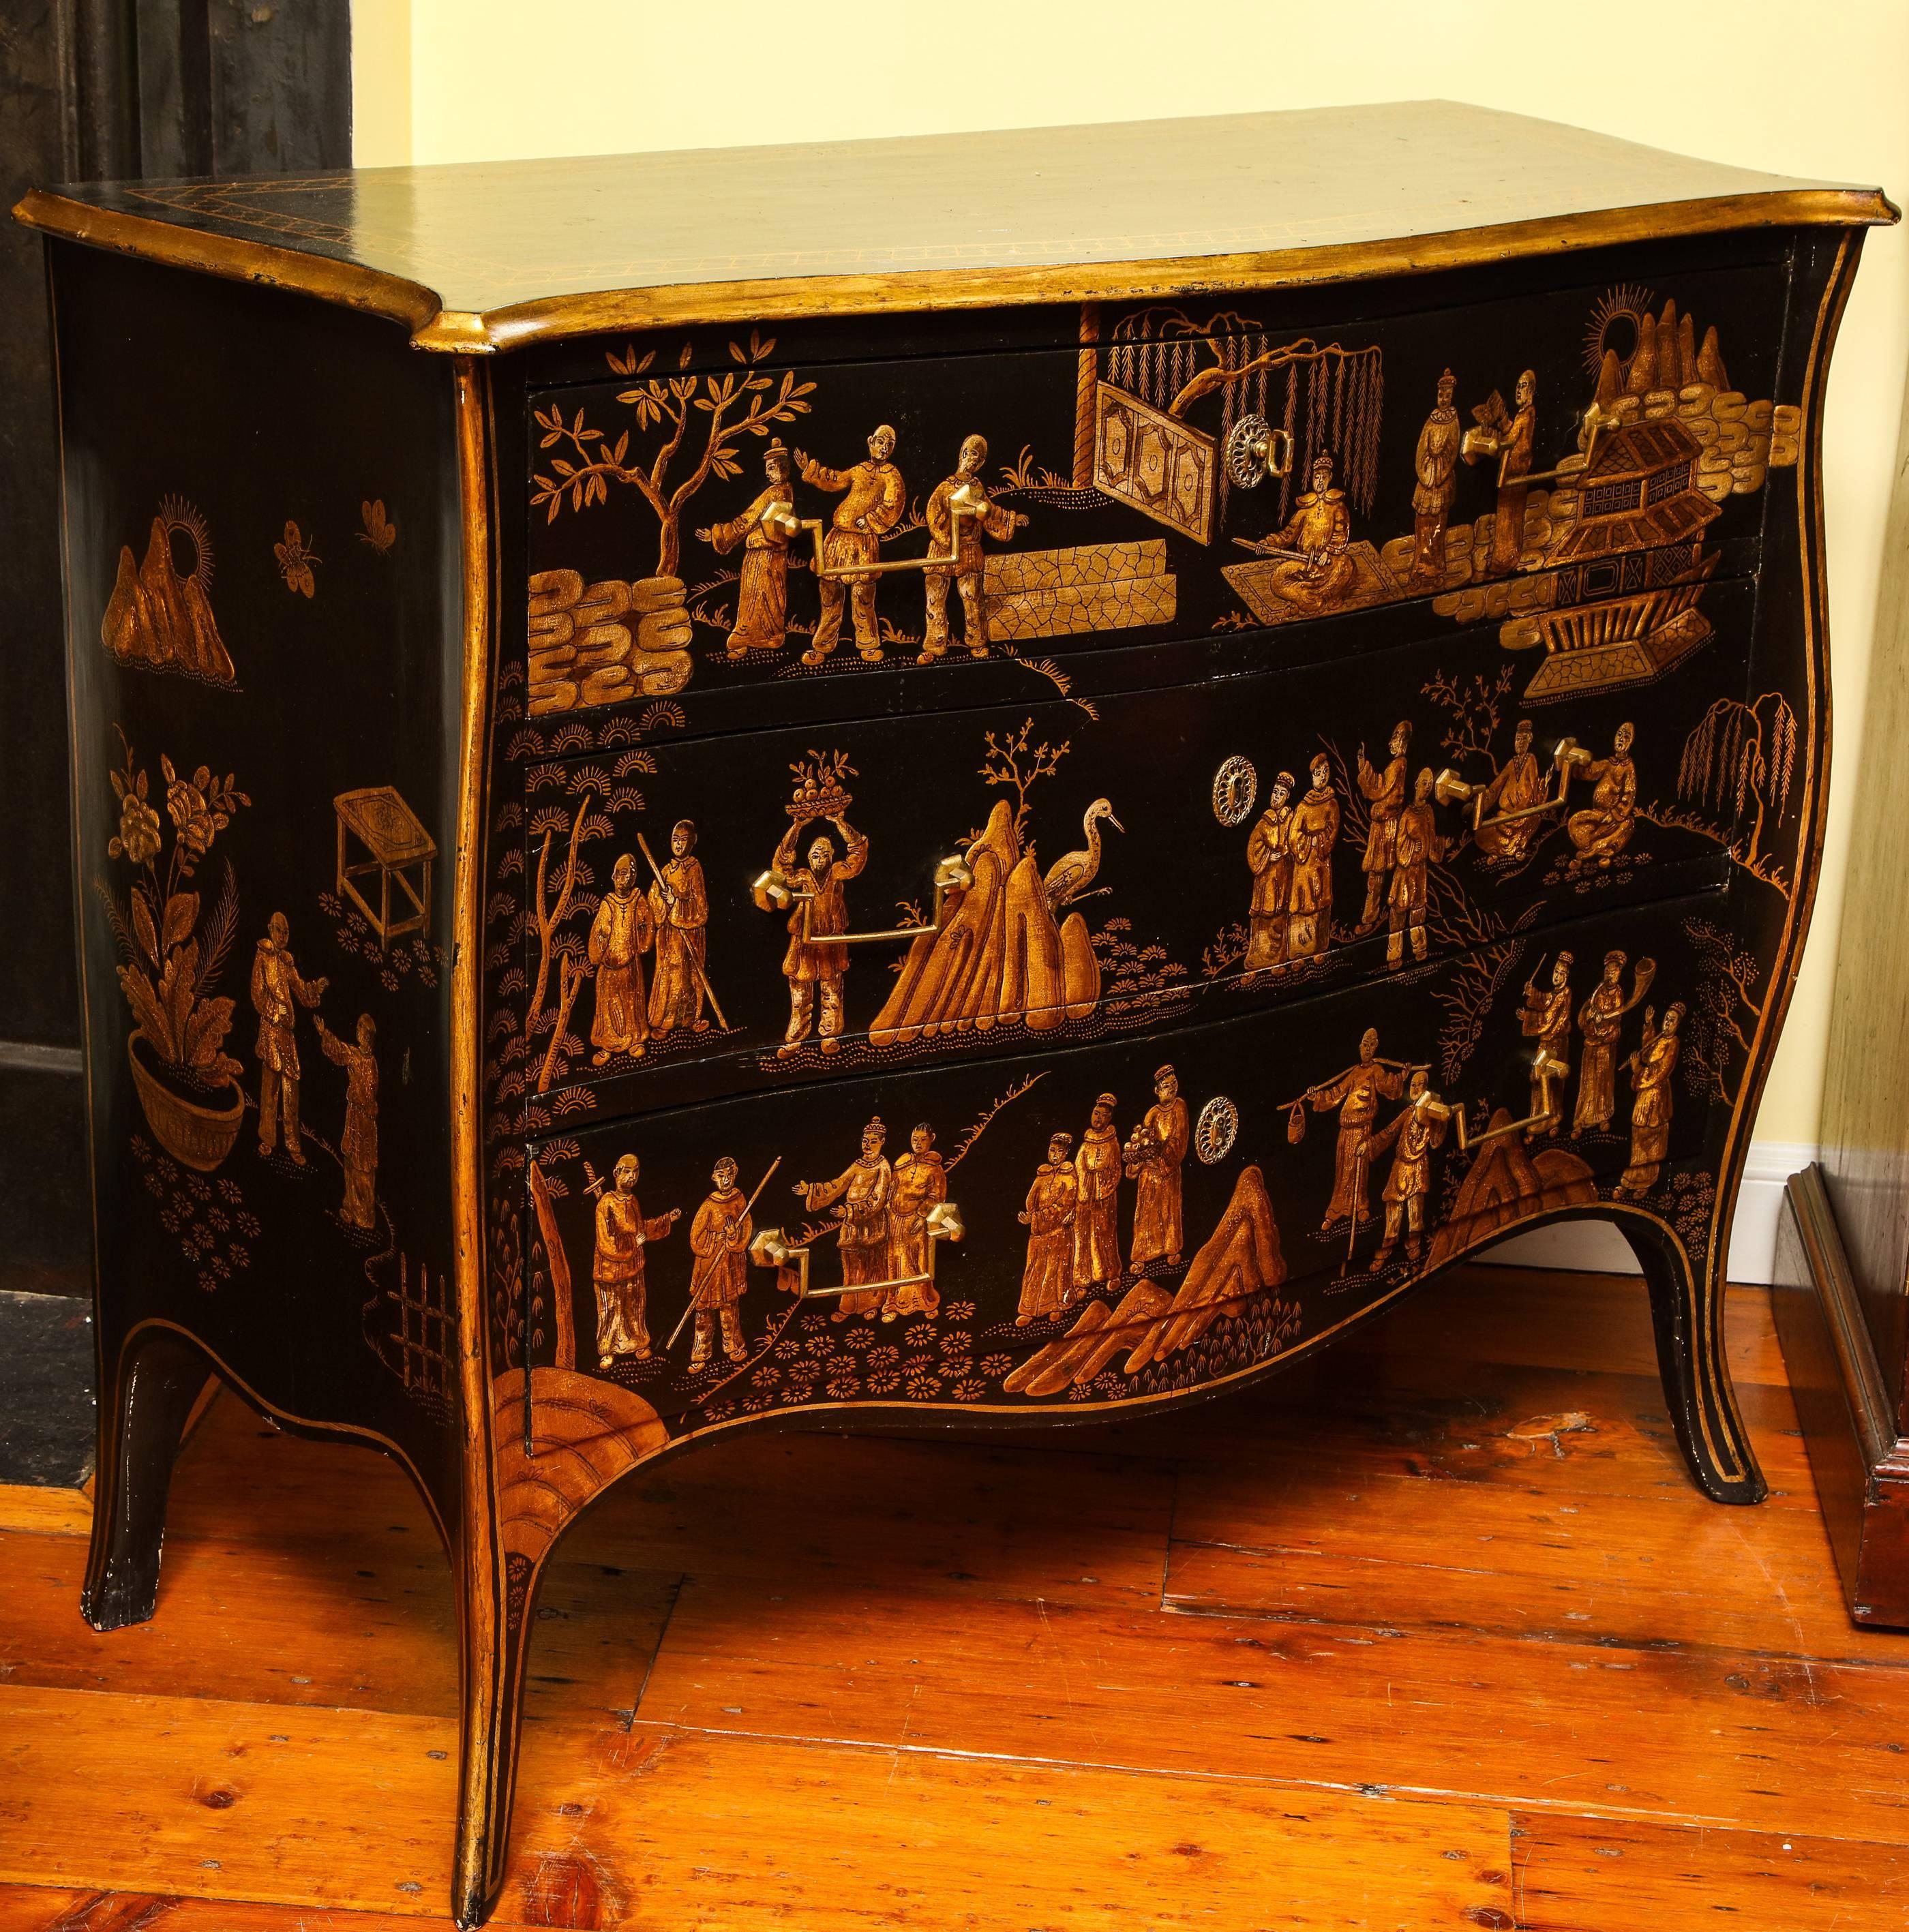 Very fine Louis XV style chinoiserie serpentine chest of drawers, shaped top with a conforming band of diaper pattern, the front and sides japanned in silver and gold with overall decorative scheme of musicians and figures at work and play amidst